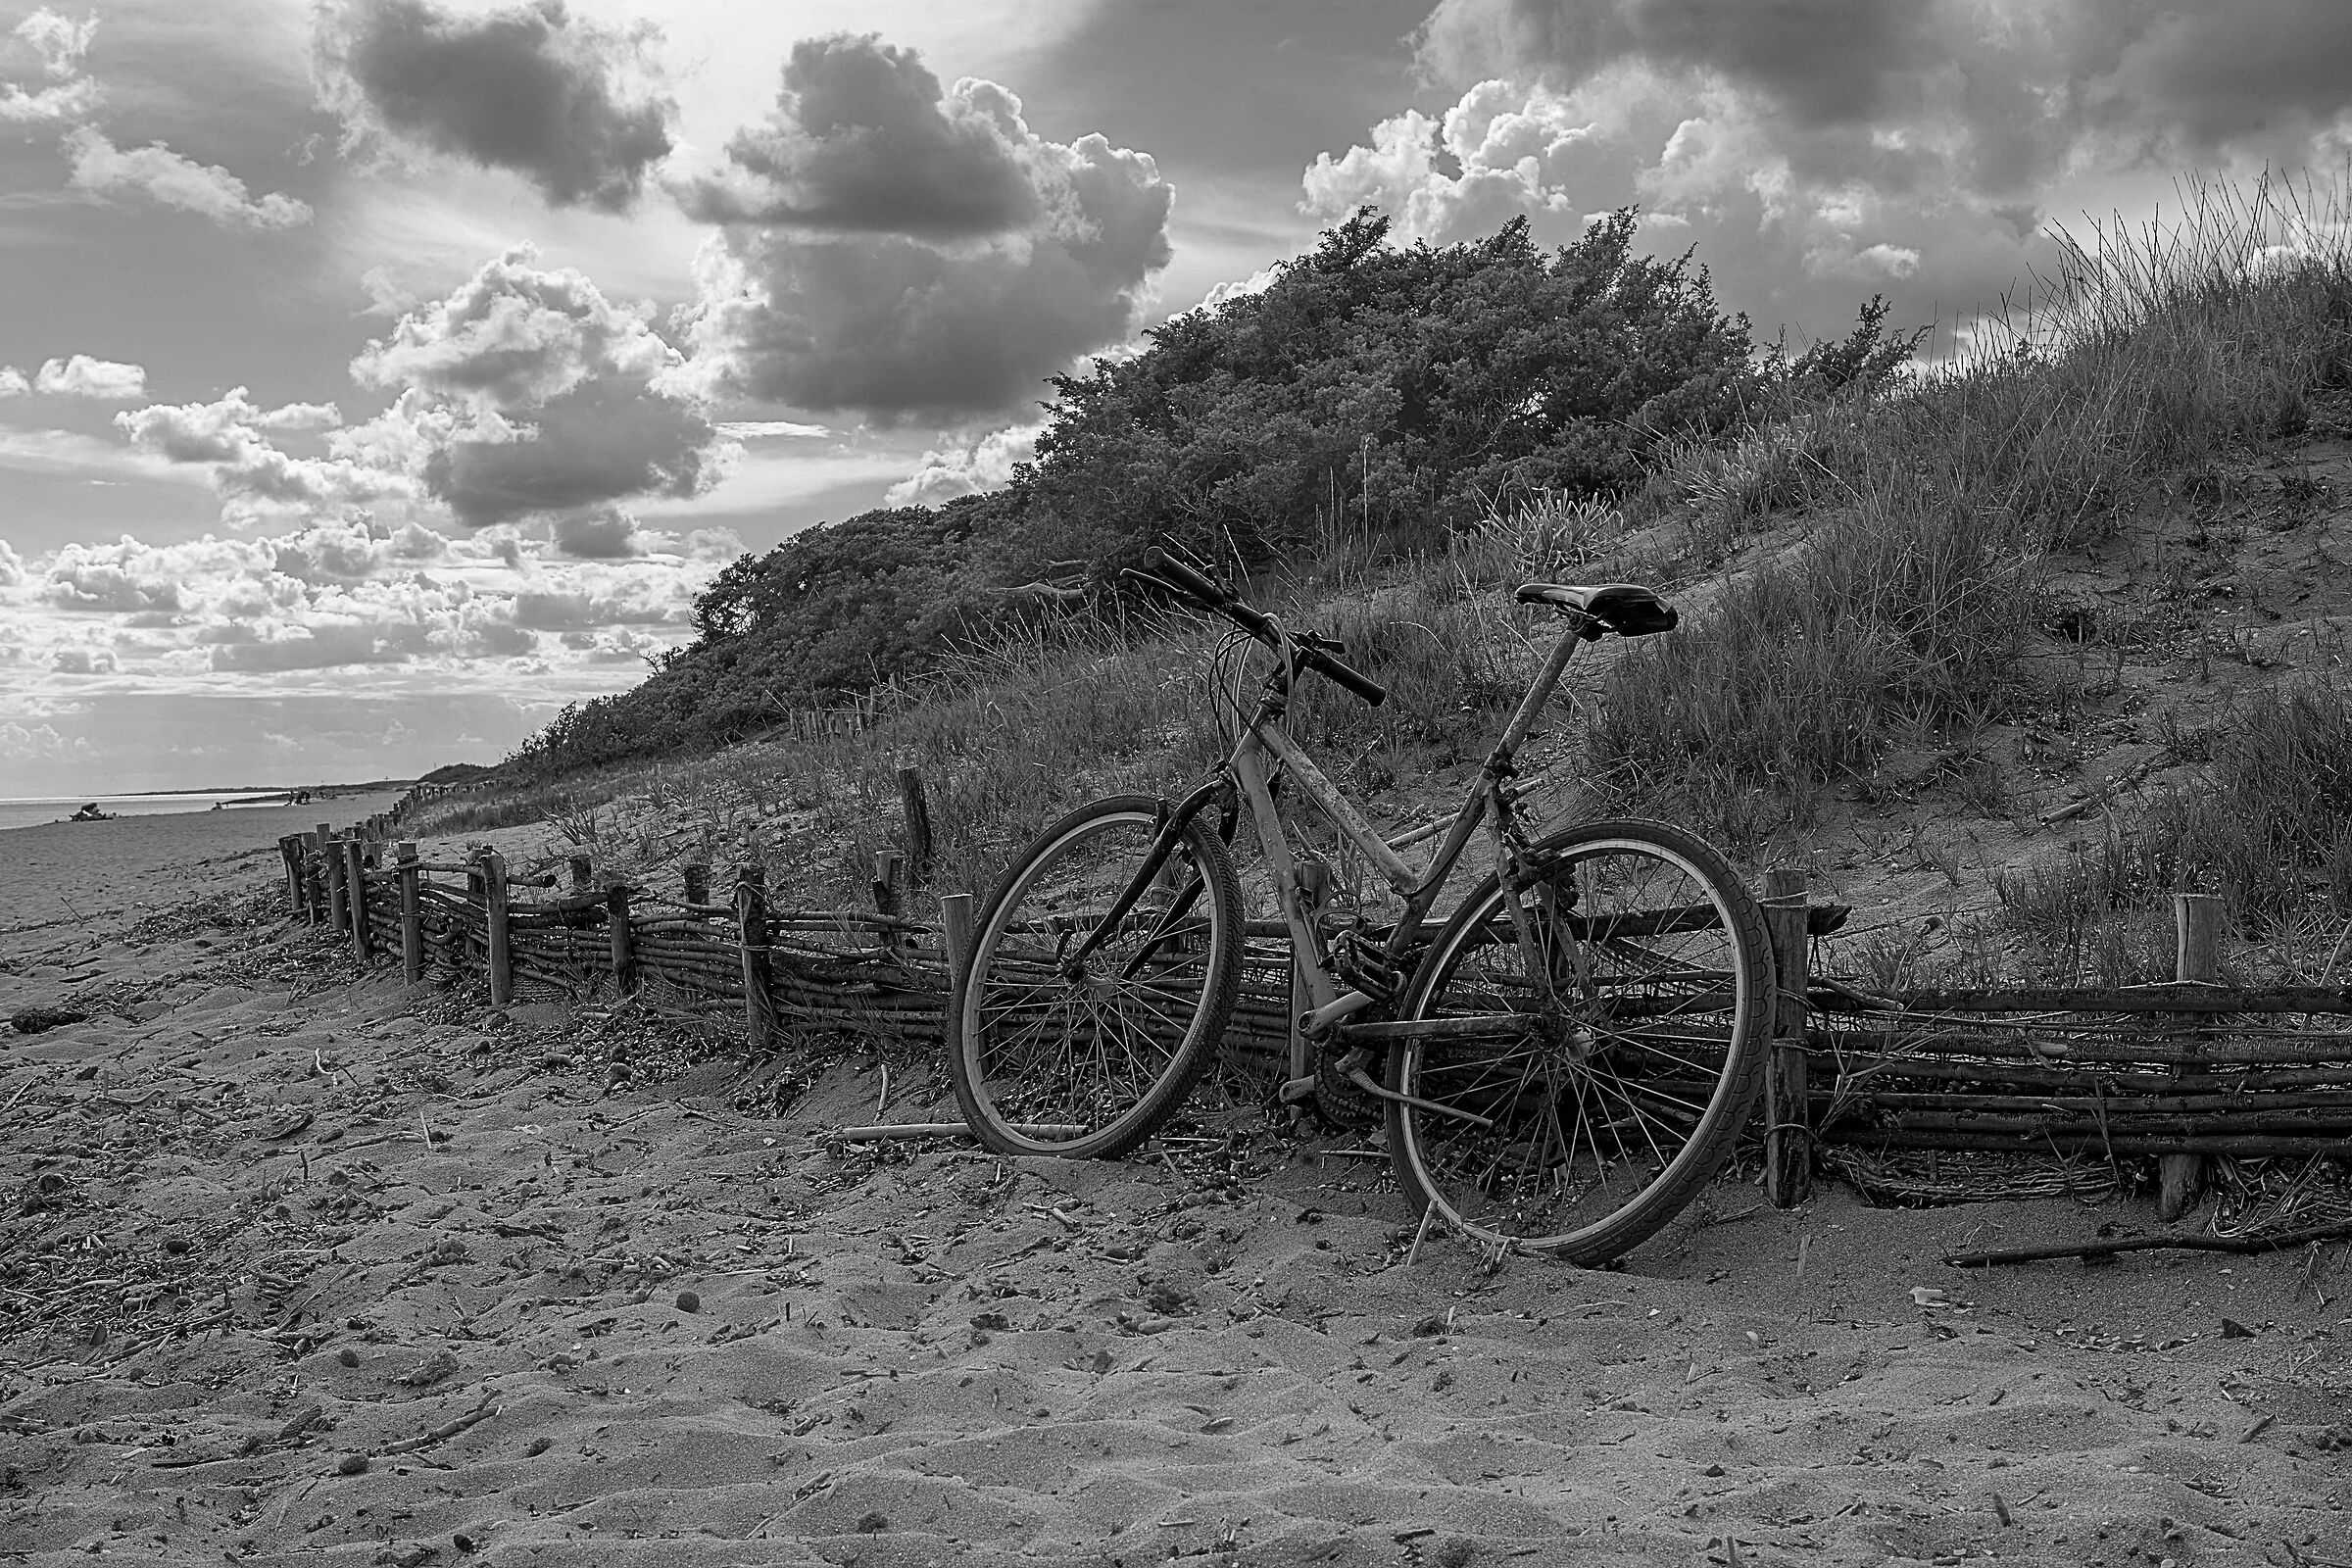 OLD MEMORIES WHEN YOU WENT TO THE BEACH WITH THE BIKE...